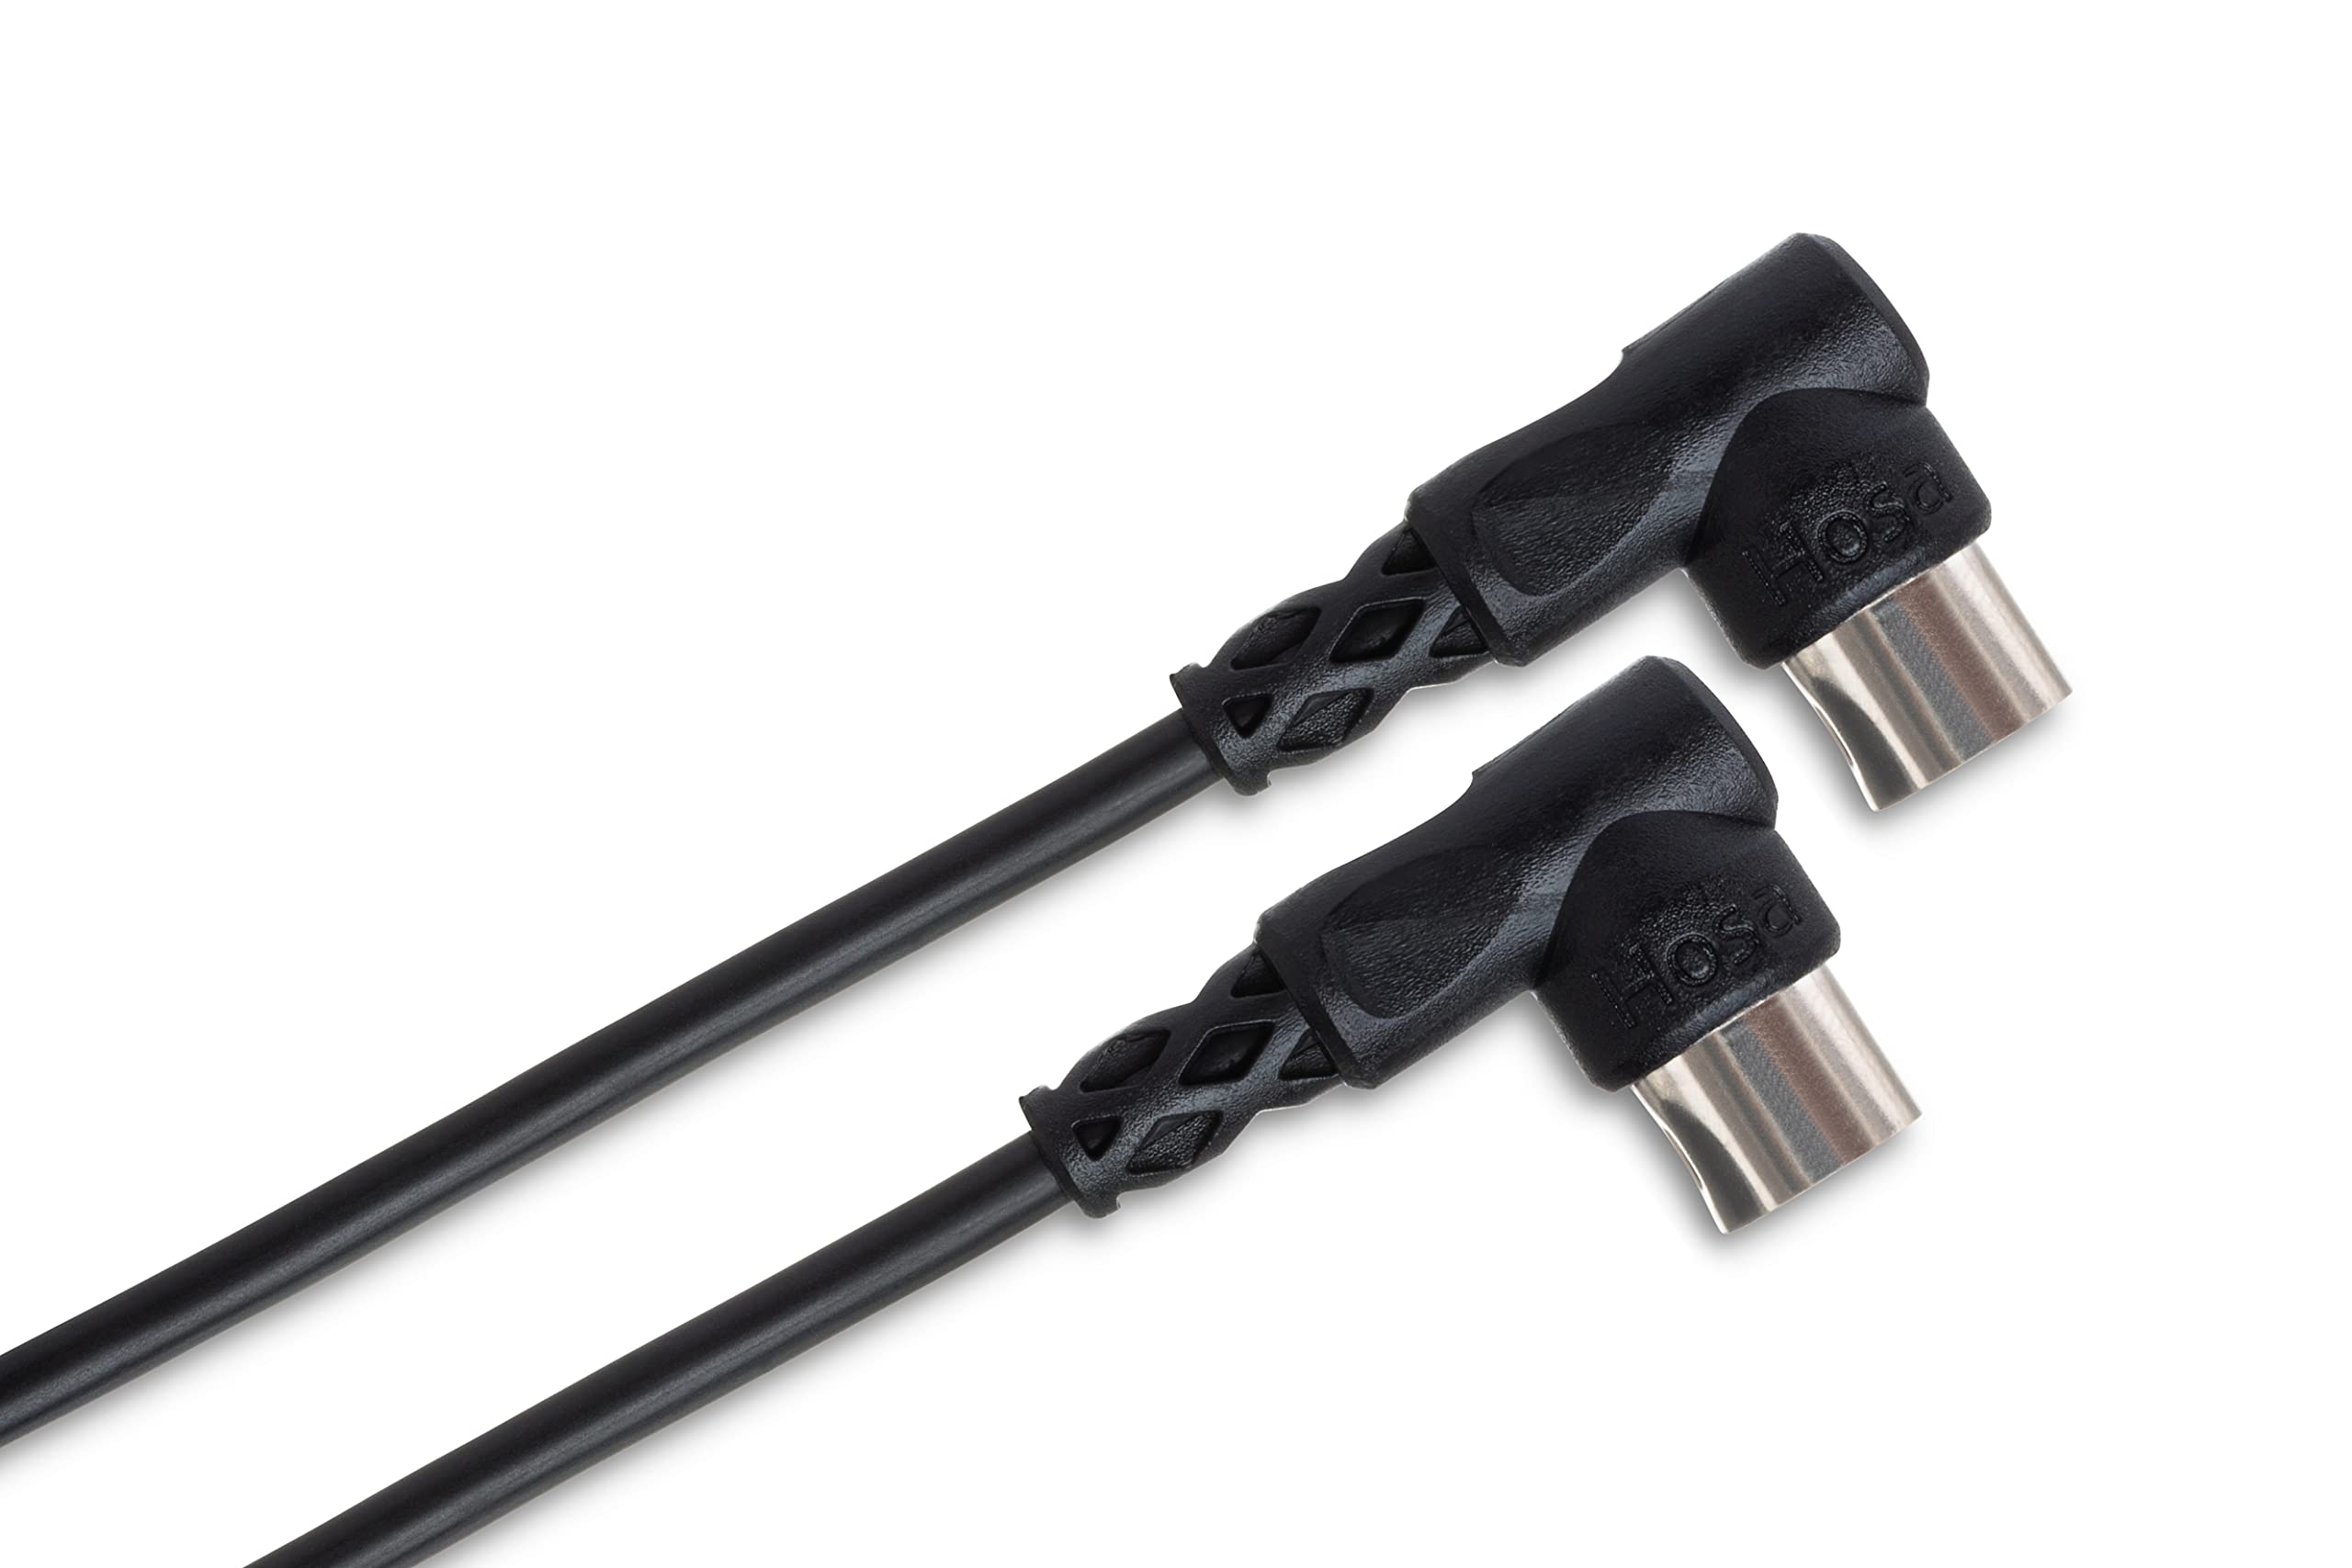 Hosa MID-303RR Right Angle 5-Pin DIN to Right Angle 5-Pin DIN MIDI Cable, 3 Feet Black, 1 Count (Pack of 1)